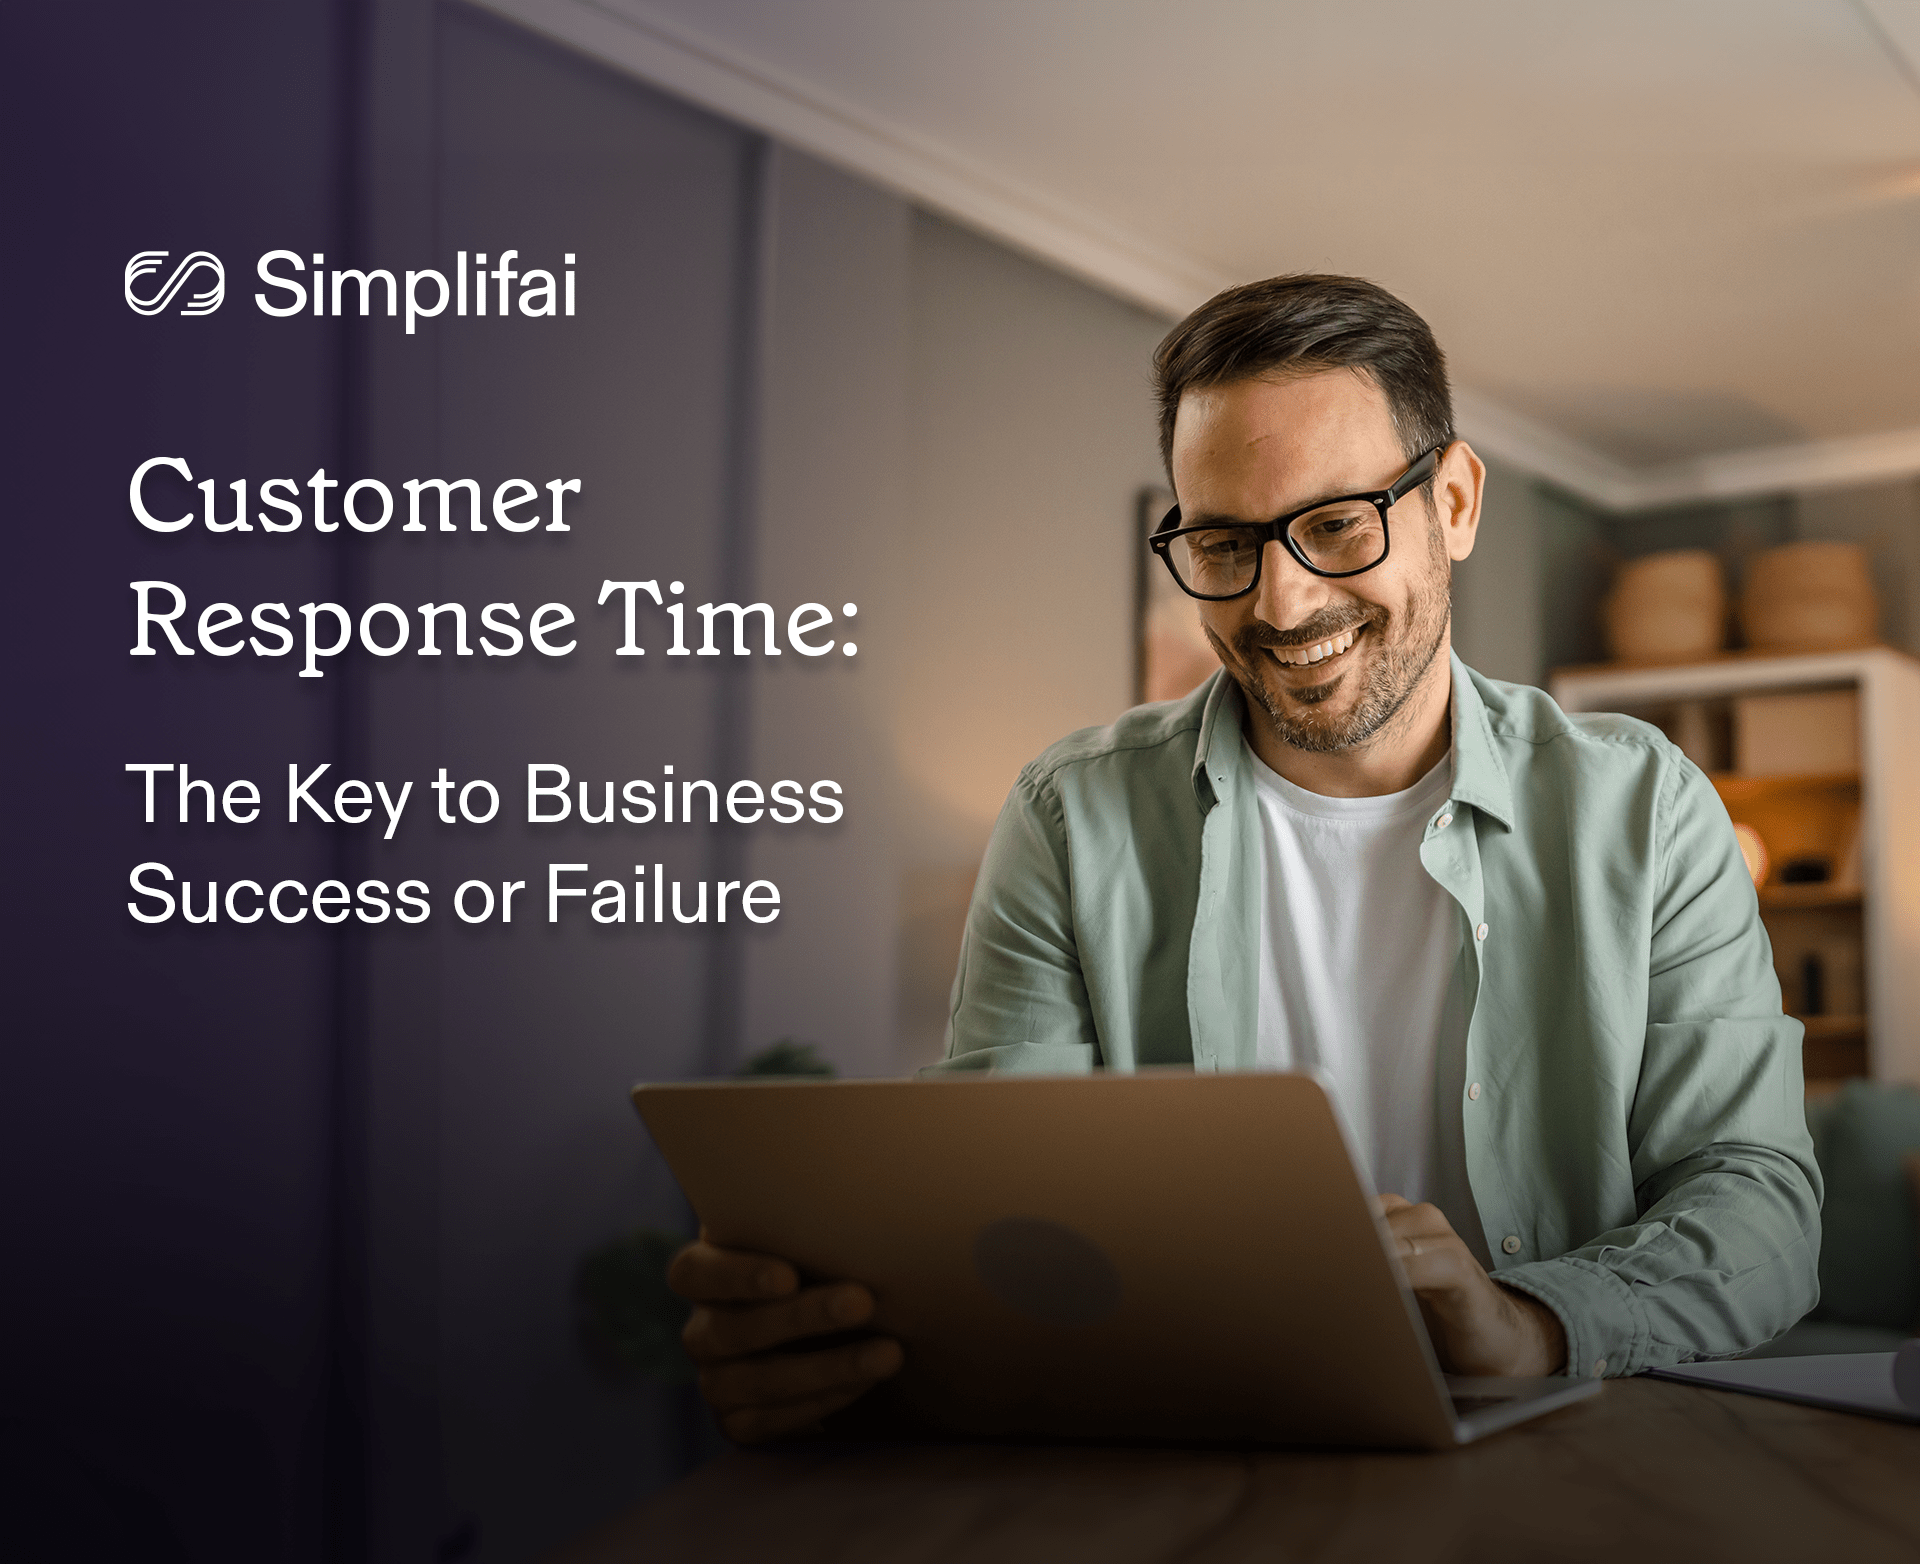 Customer Response Time: The Key to Business Success or Failure